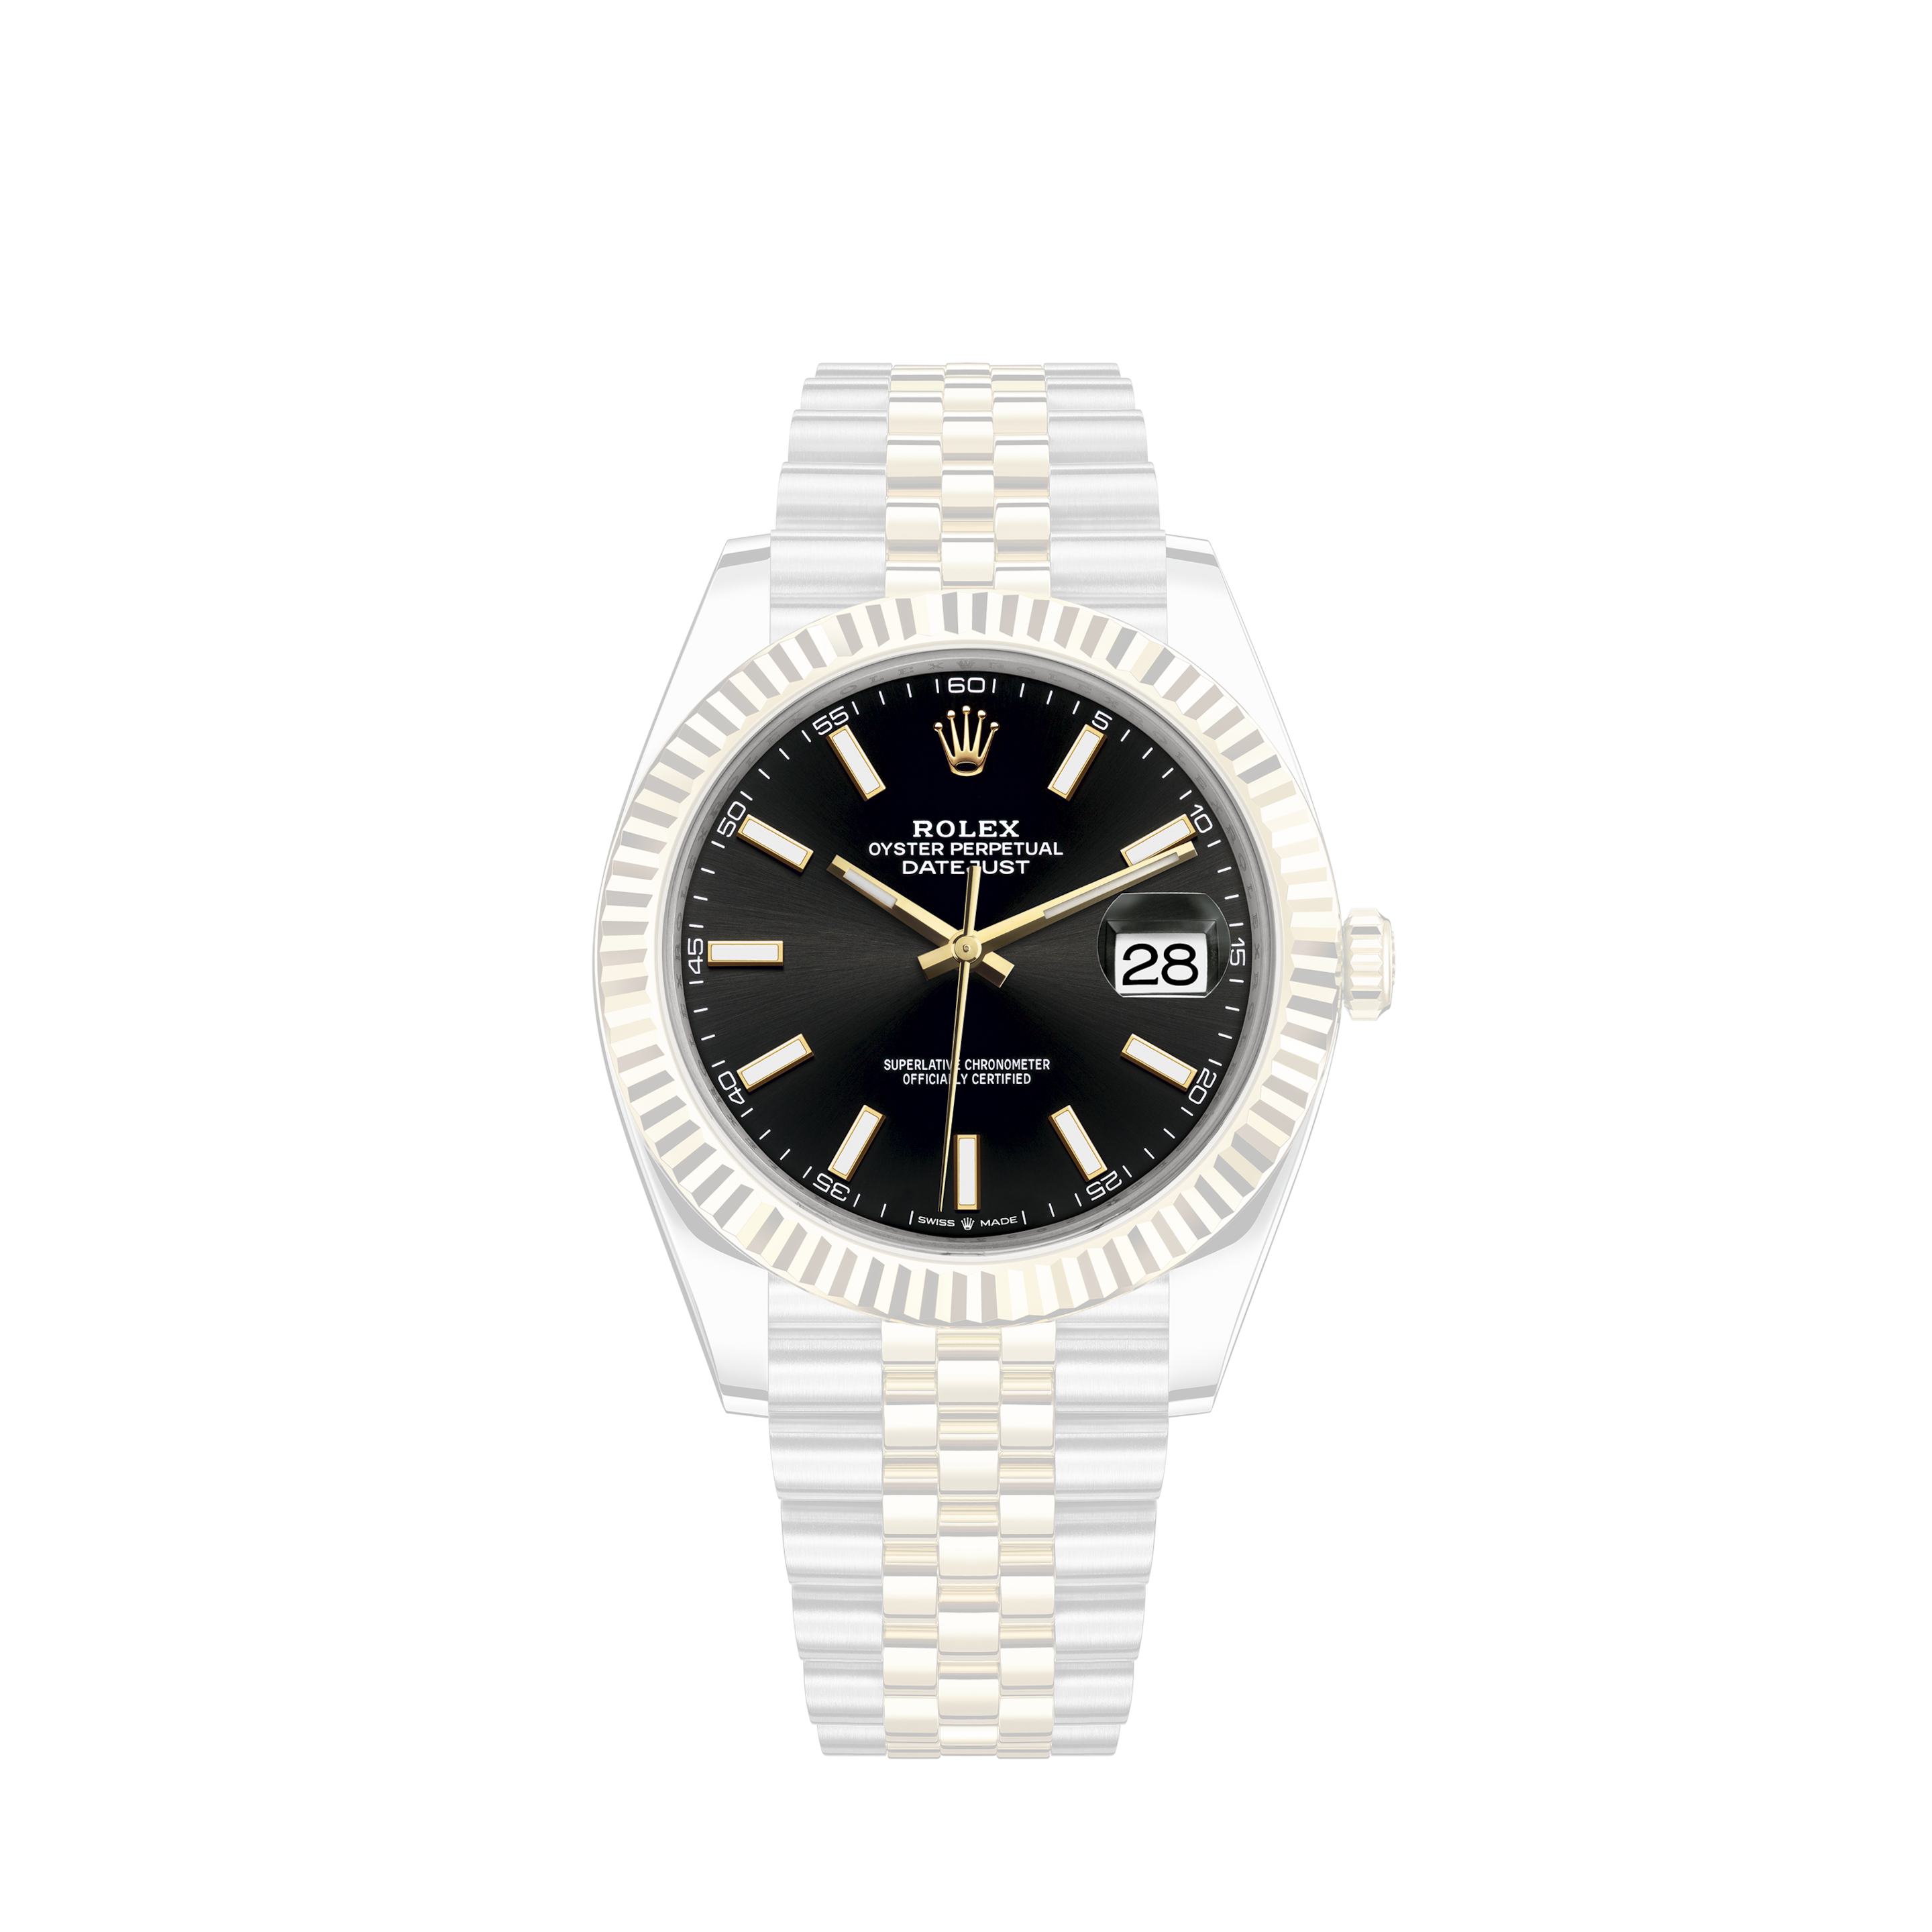 Rolex 126233 Two-Tone Steel and Yellow Gold Datejust 36 Fluted Bezel Wimbledon Roman Dial